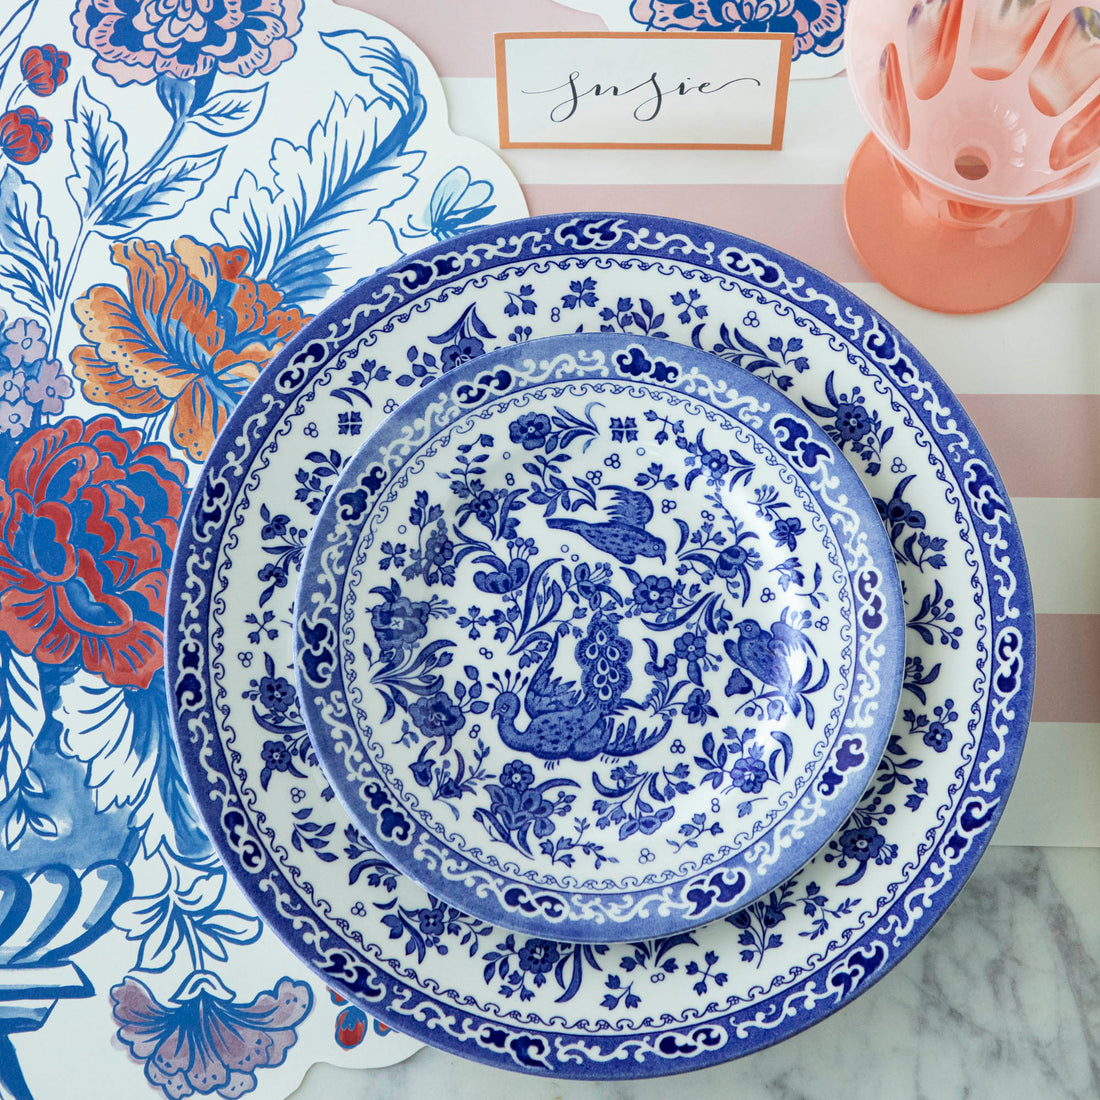 Blue and white patterned Burleigh Blue Regal Peacock Dinnerware plates on a floral patterned background with a name card and a pink glass vase.